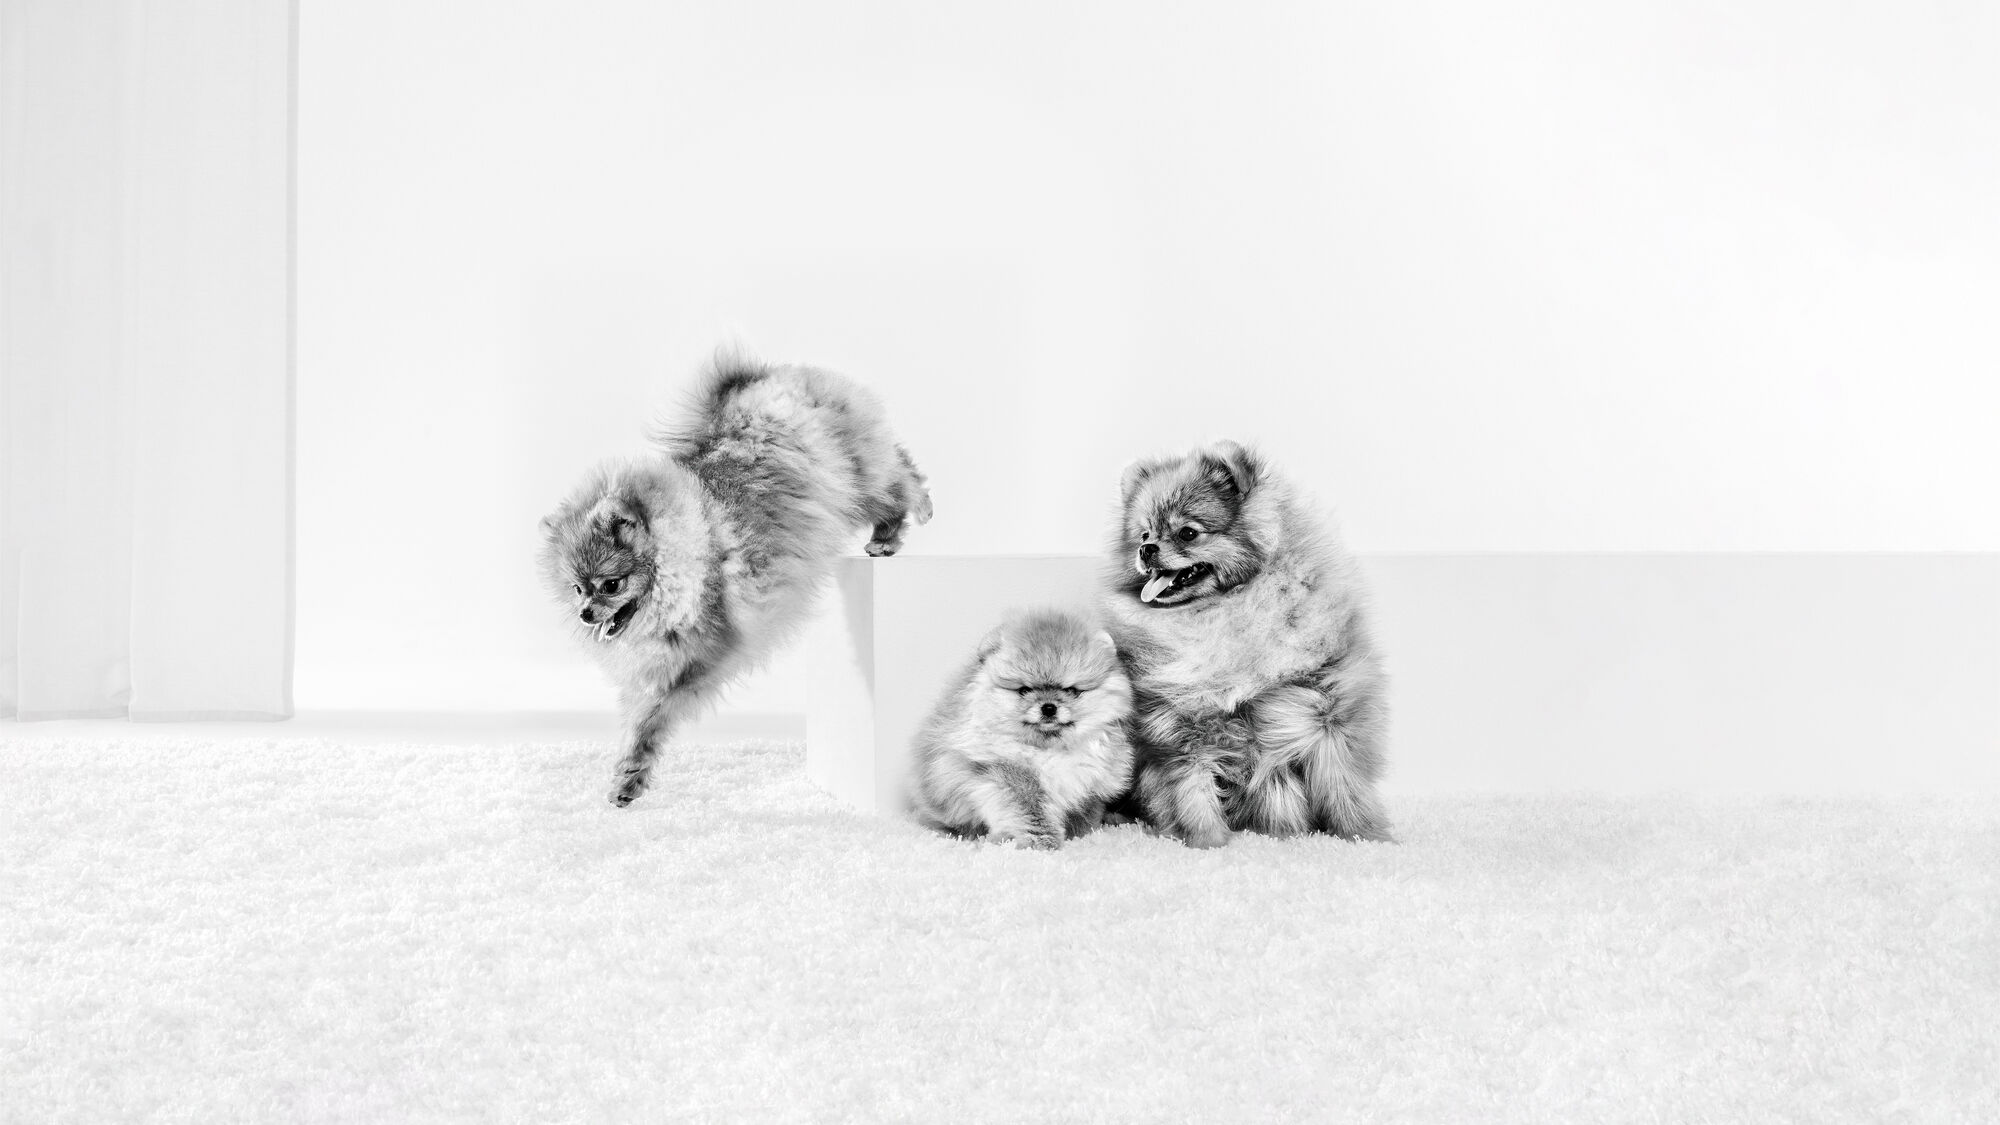 Black and White group of Pomeranian puppies playing inside